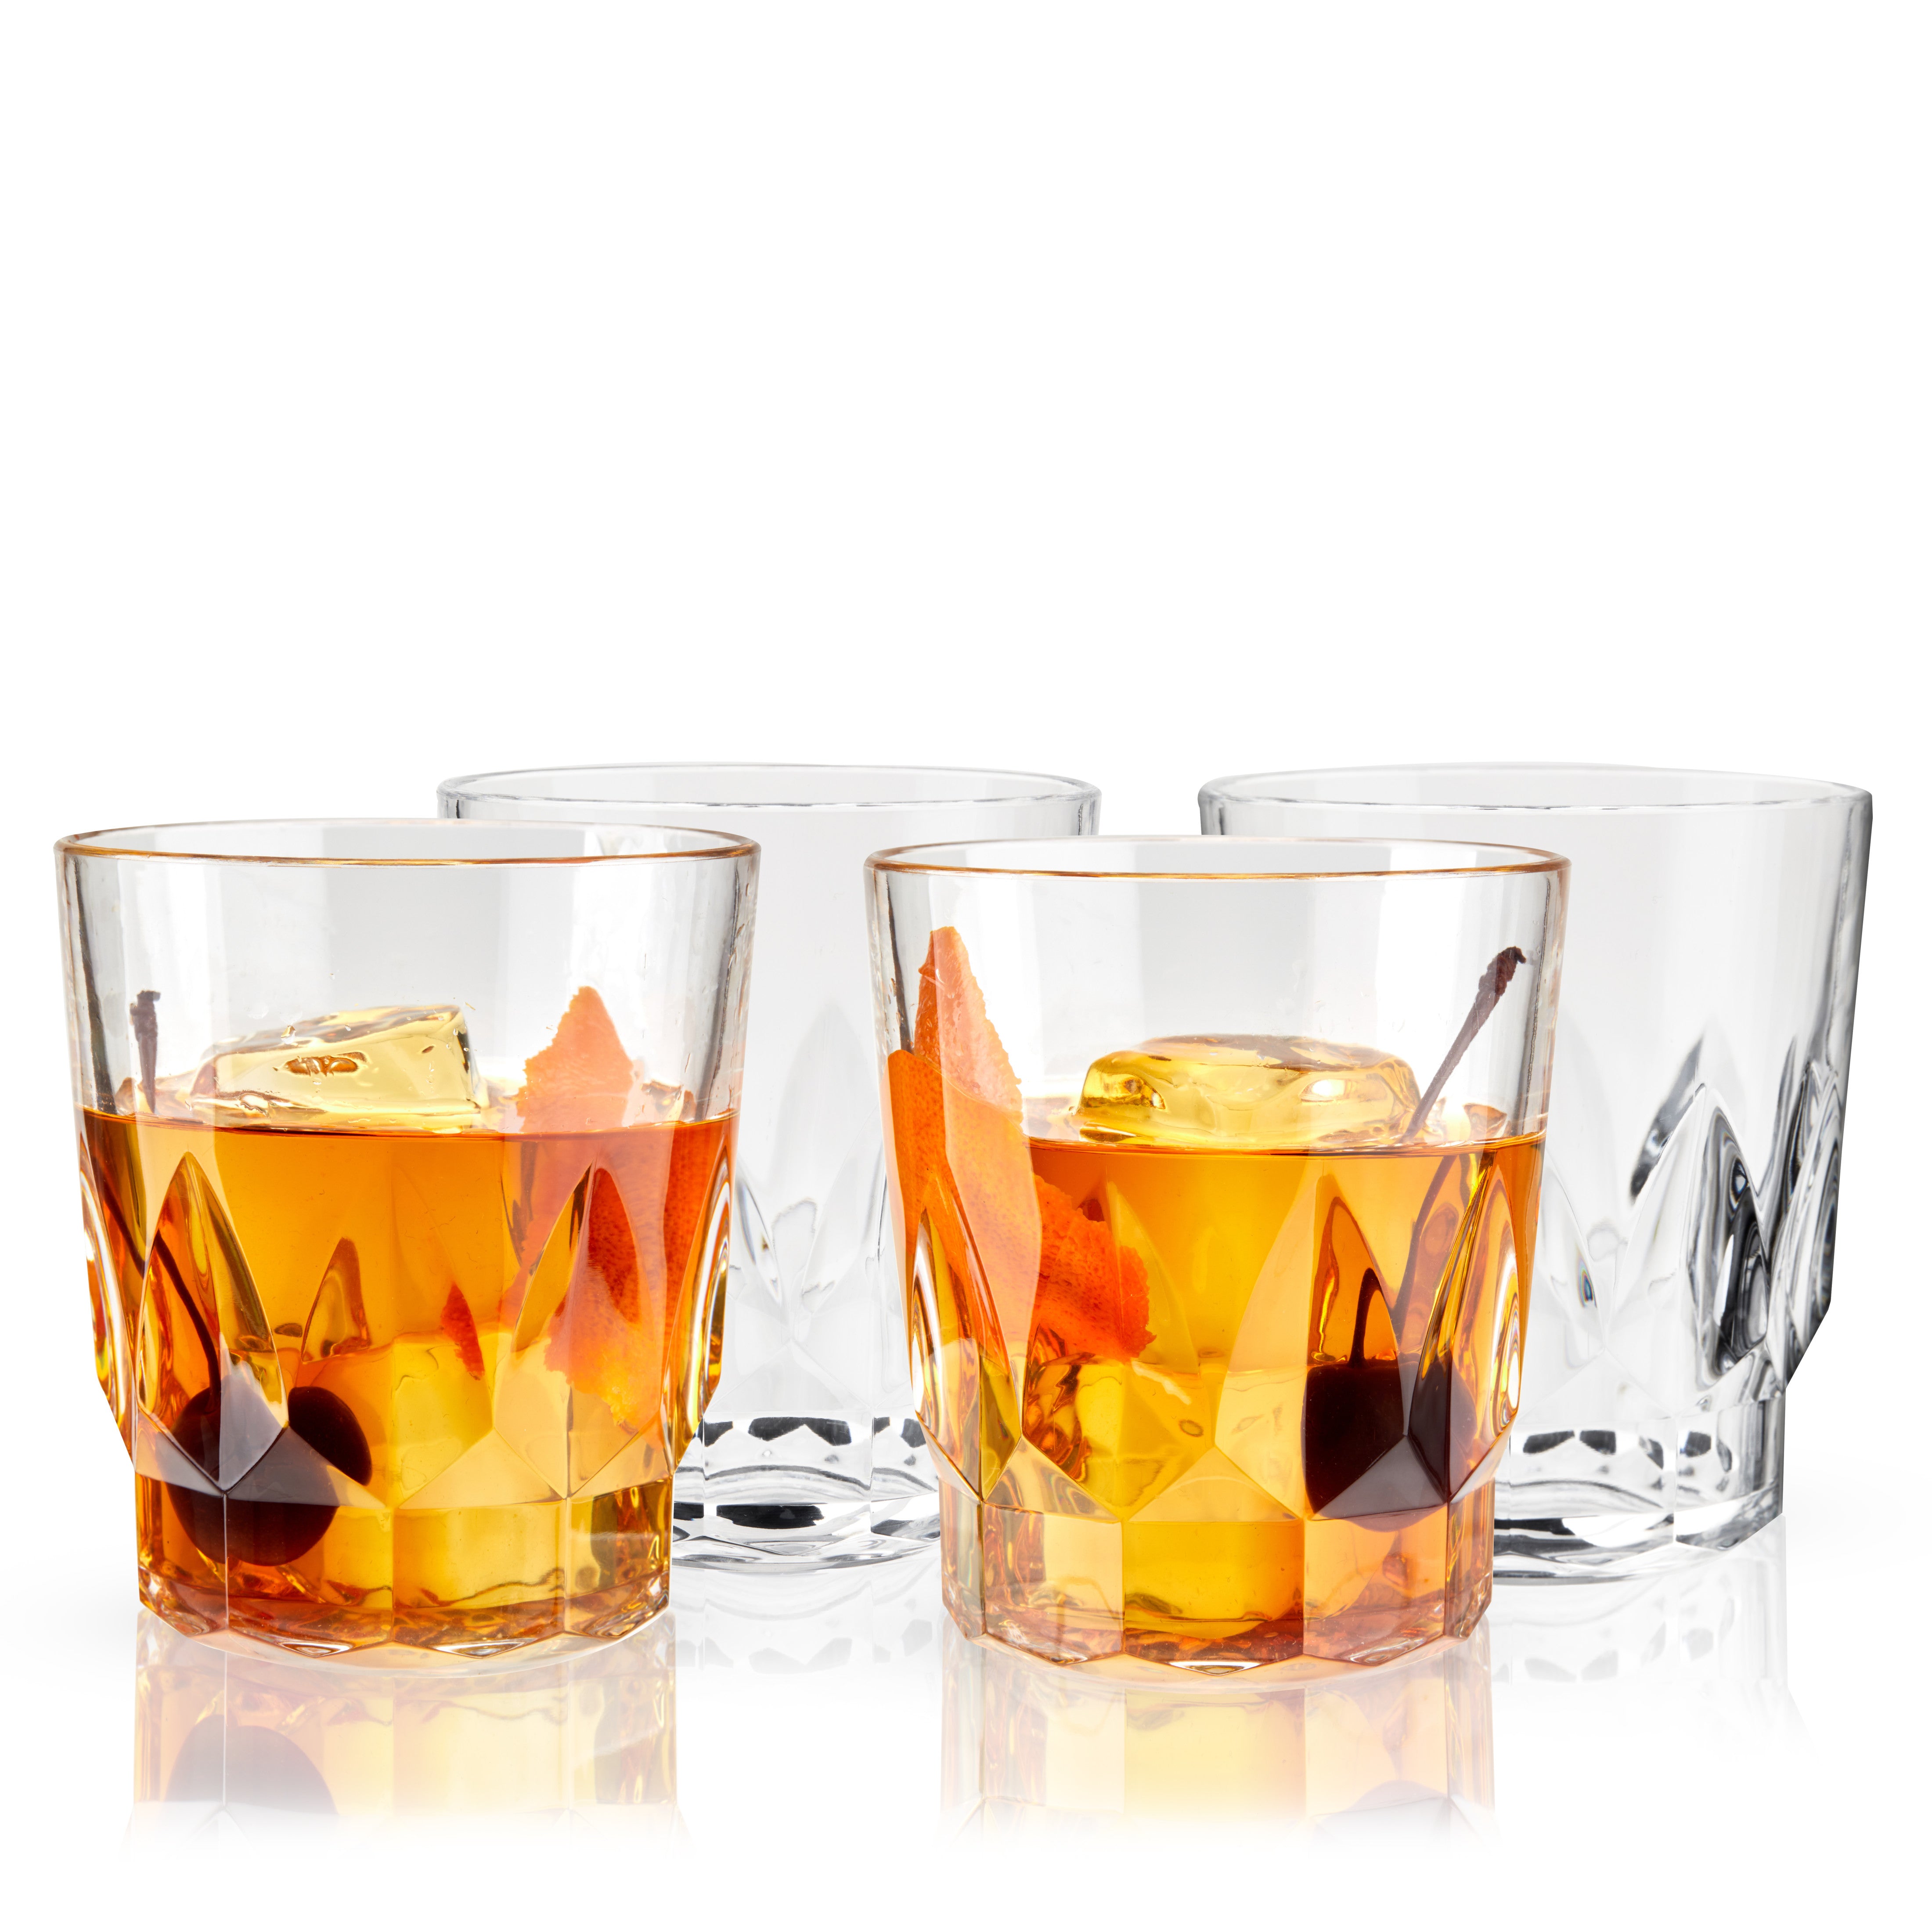 Diamond Whiskey Glasses, Stemless Bourbon Glass, Anti Rocking Drinking Glasses, Set of 2, Size: One size, Clear